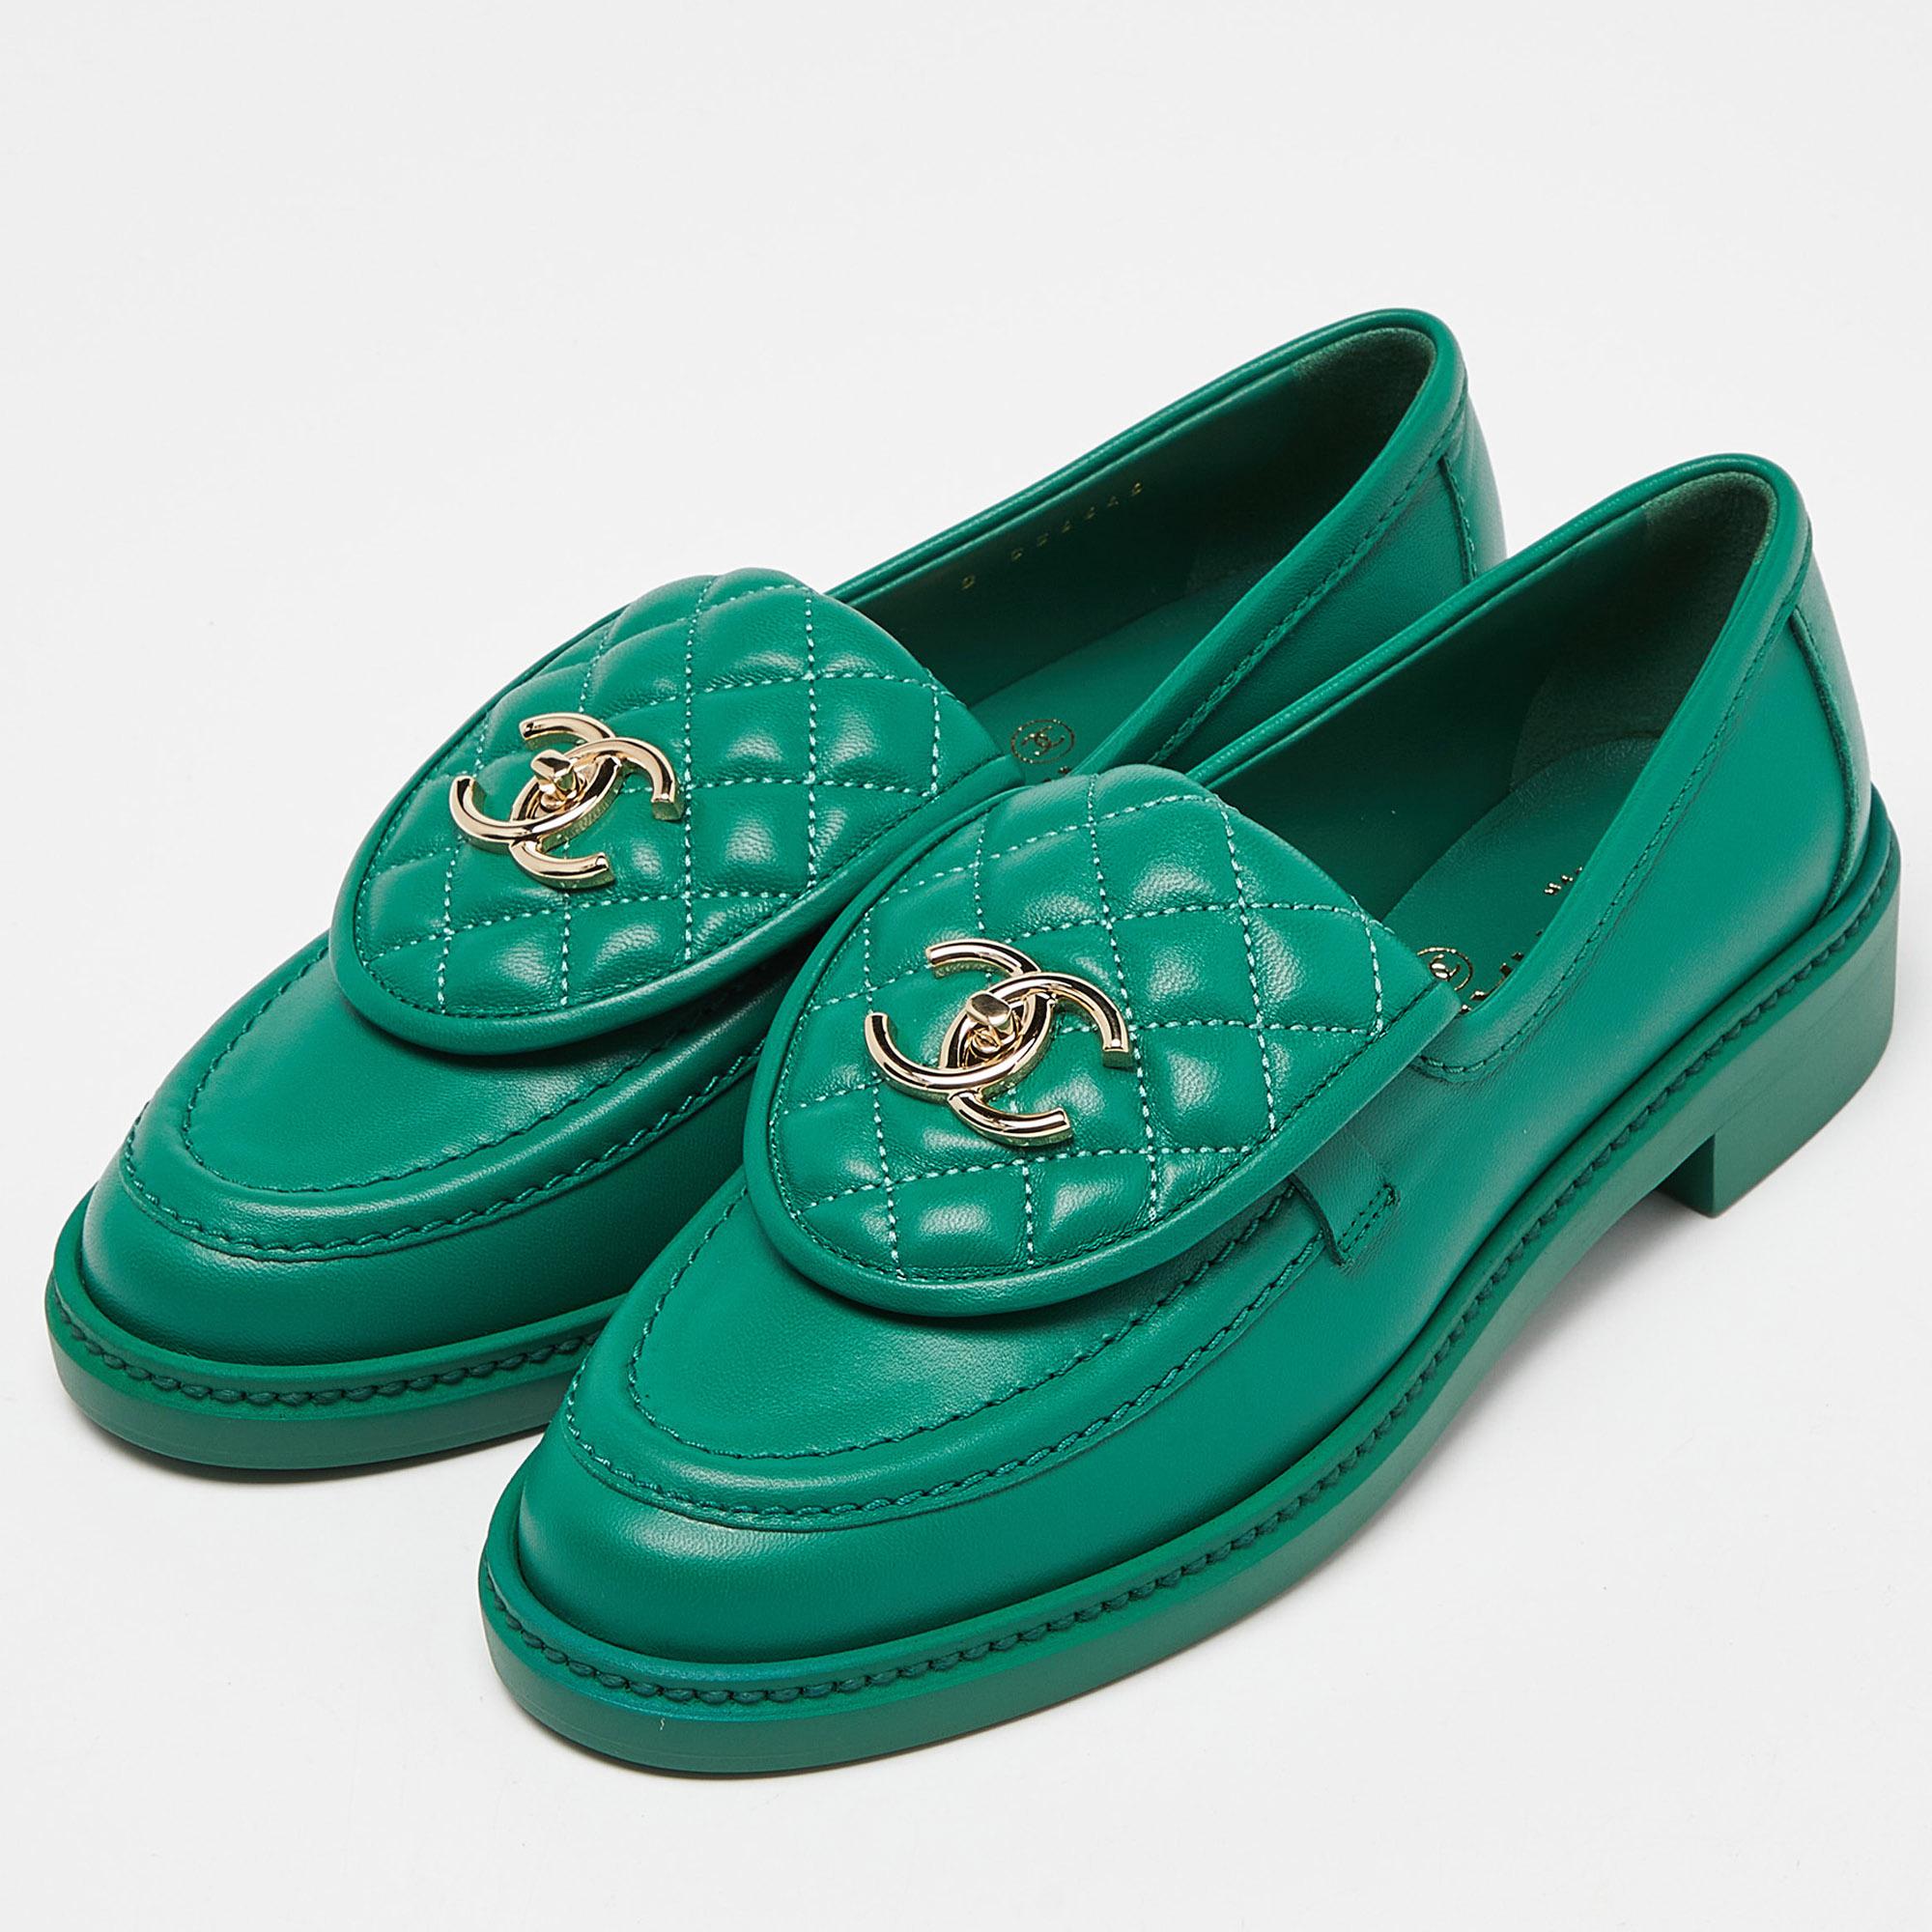 Crafted with meticulous attention to detail, these Chanel loafers boast luxurious green leather adorned with the iconic CC interlocking logo. With their sophisticated design and superior craftsmanship, they effortlessly elevate any ensemble with